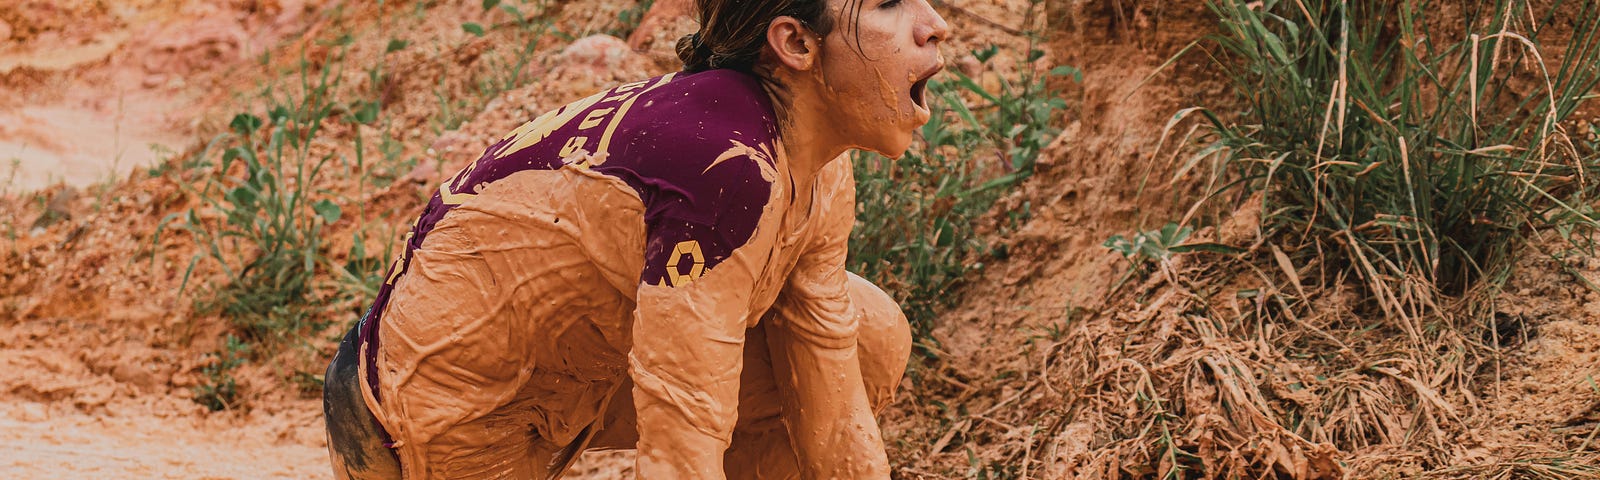 Girl competing in mud race (Spartan race)